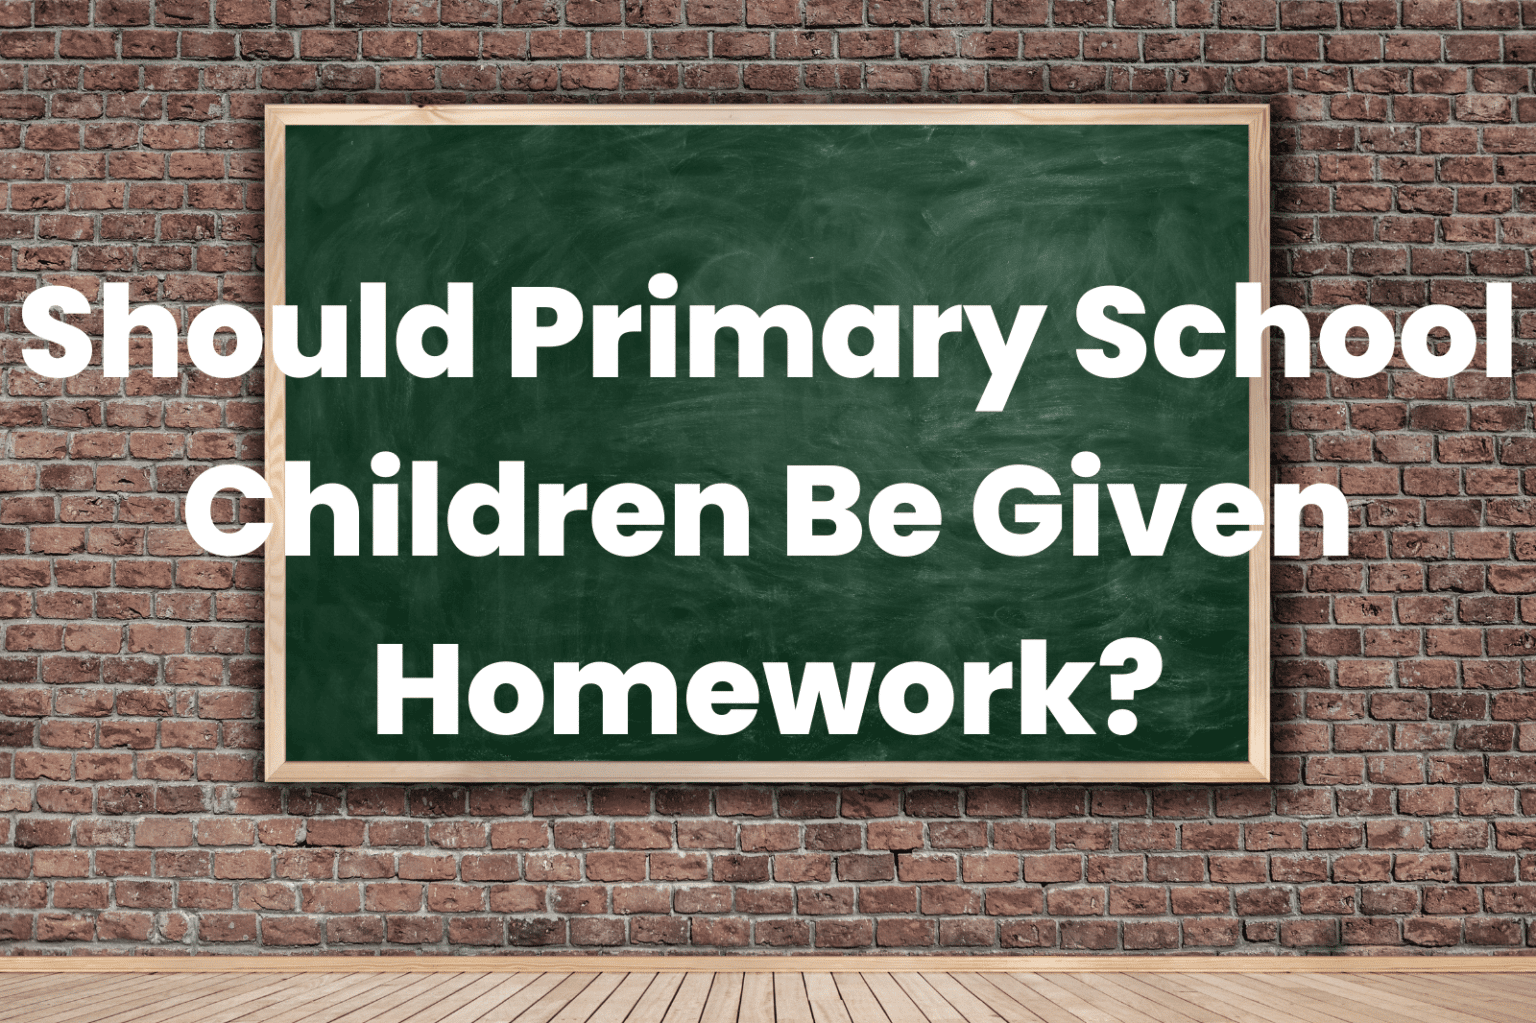 should homework be given in elementary school